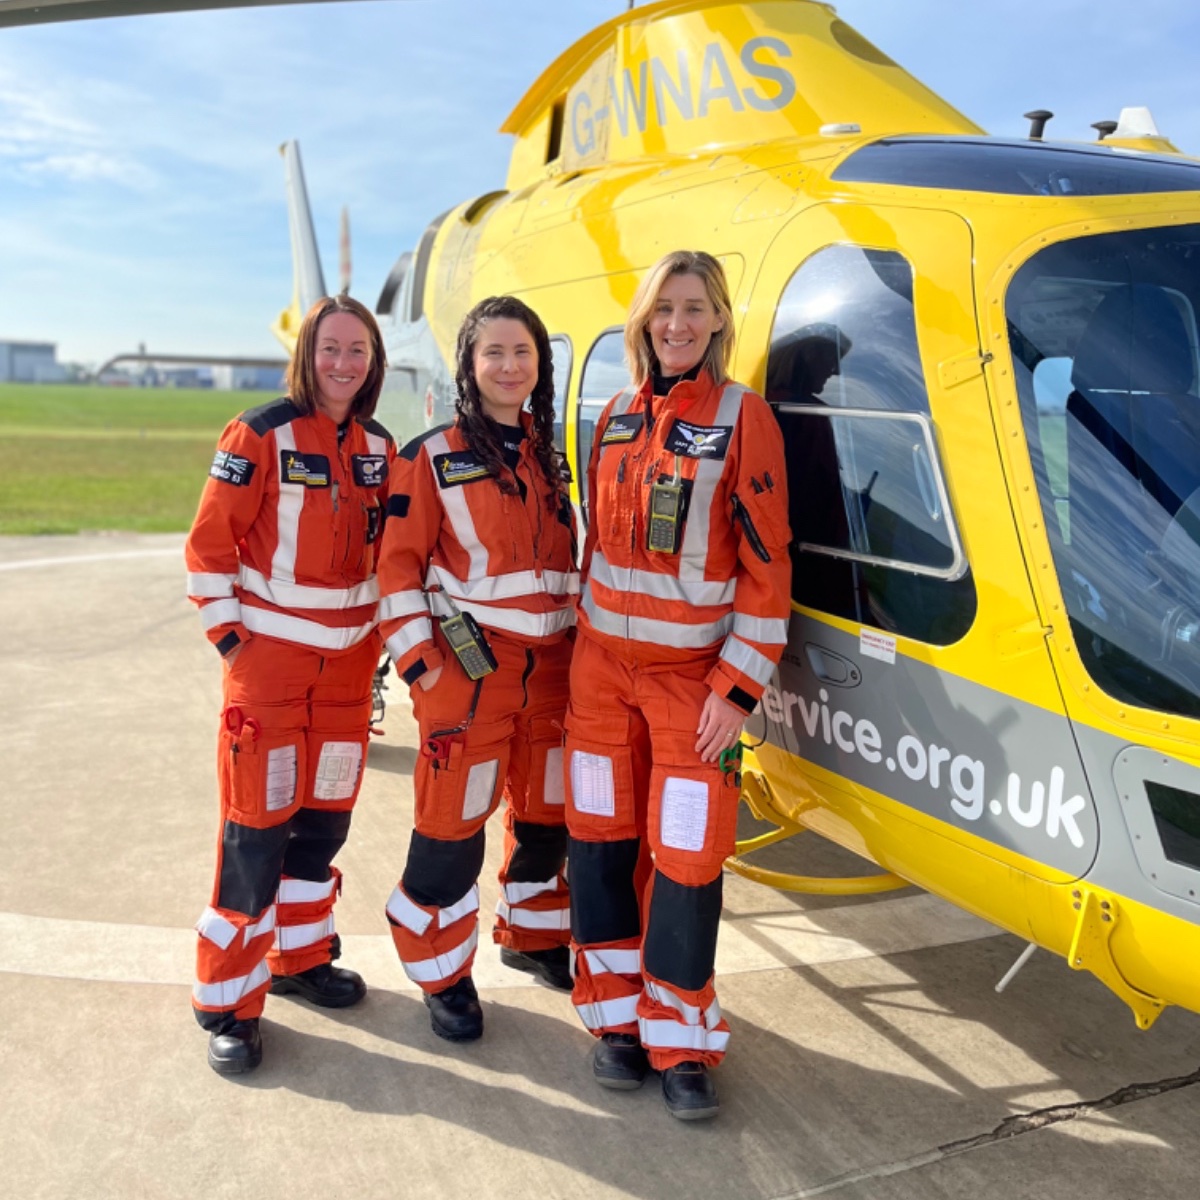 Yesterday was a brilliant milestone for us at our Warwickshire & Northamptonshire Air Ambulance, as our vital service was crewed by an all-female force! Critical Care Paramedic Sophie, Doctor Hadassah, and Pilot Jo served our local communities proving once again that excellence…